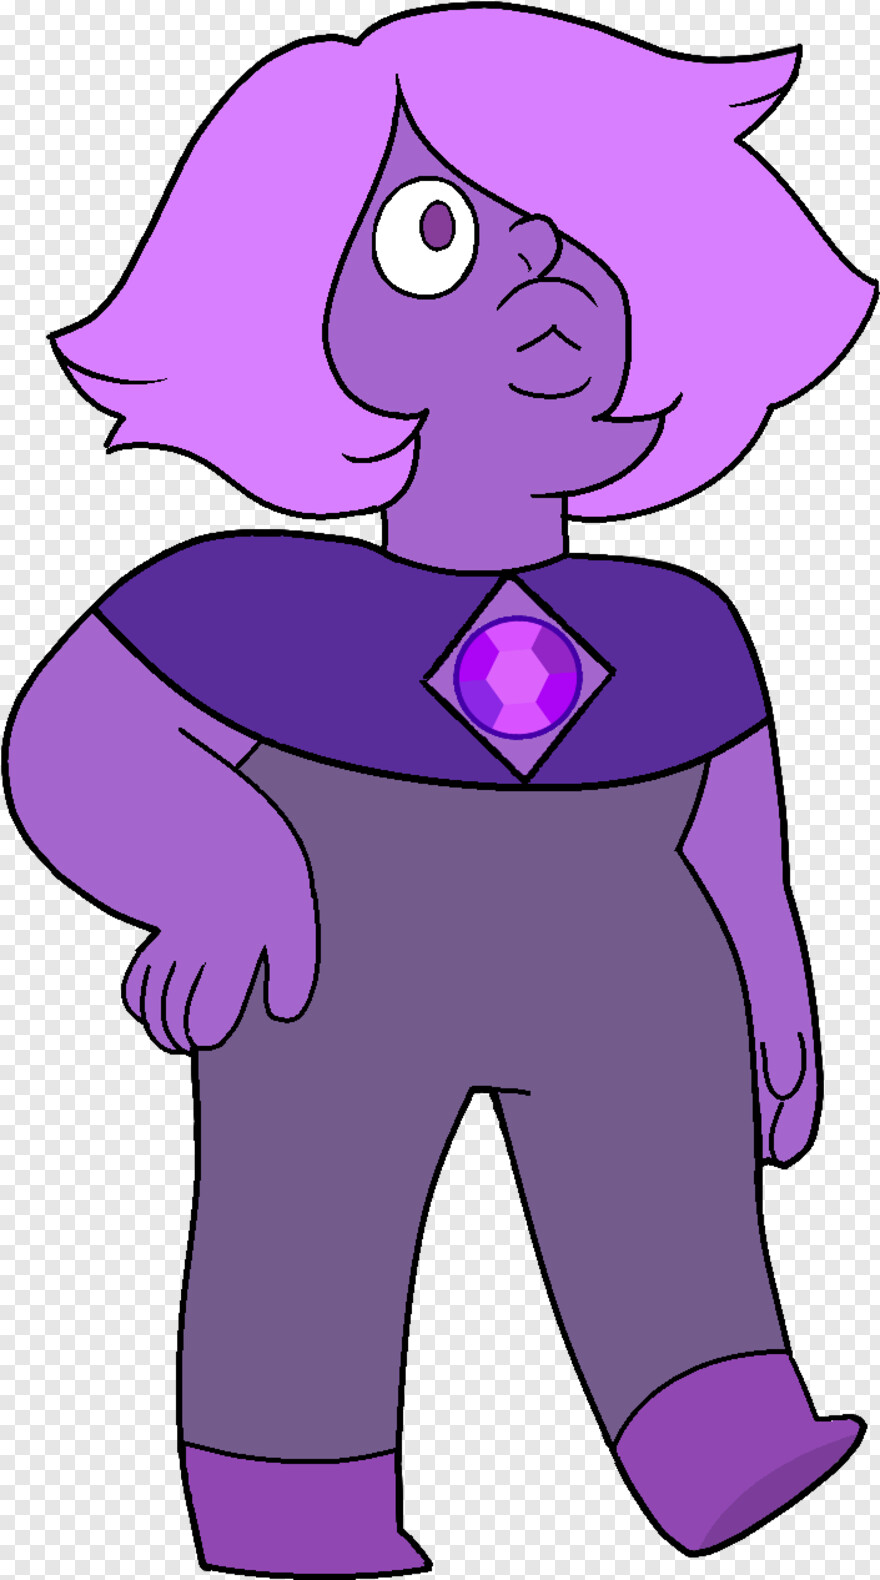  First Aid, Sofia The First, Amethyst, First, First Aid Kit, Steven Universe Amethyst